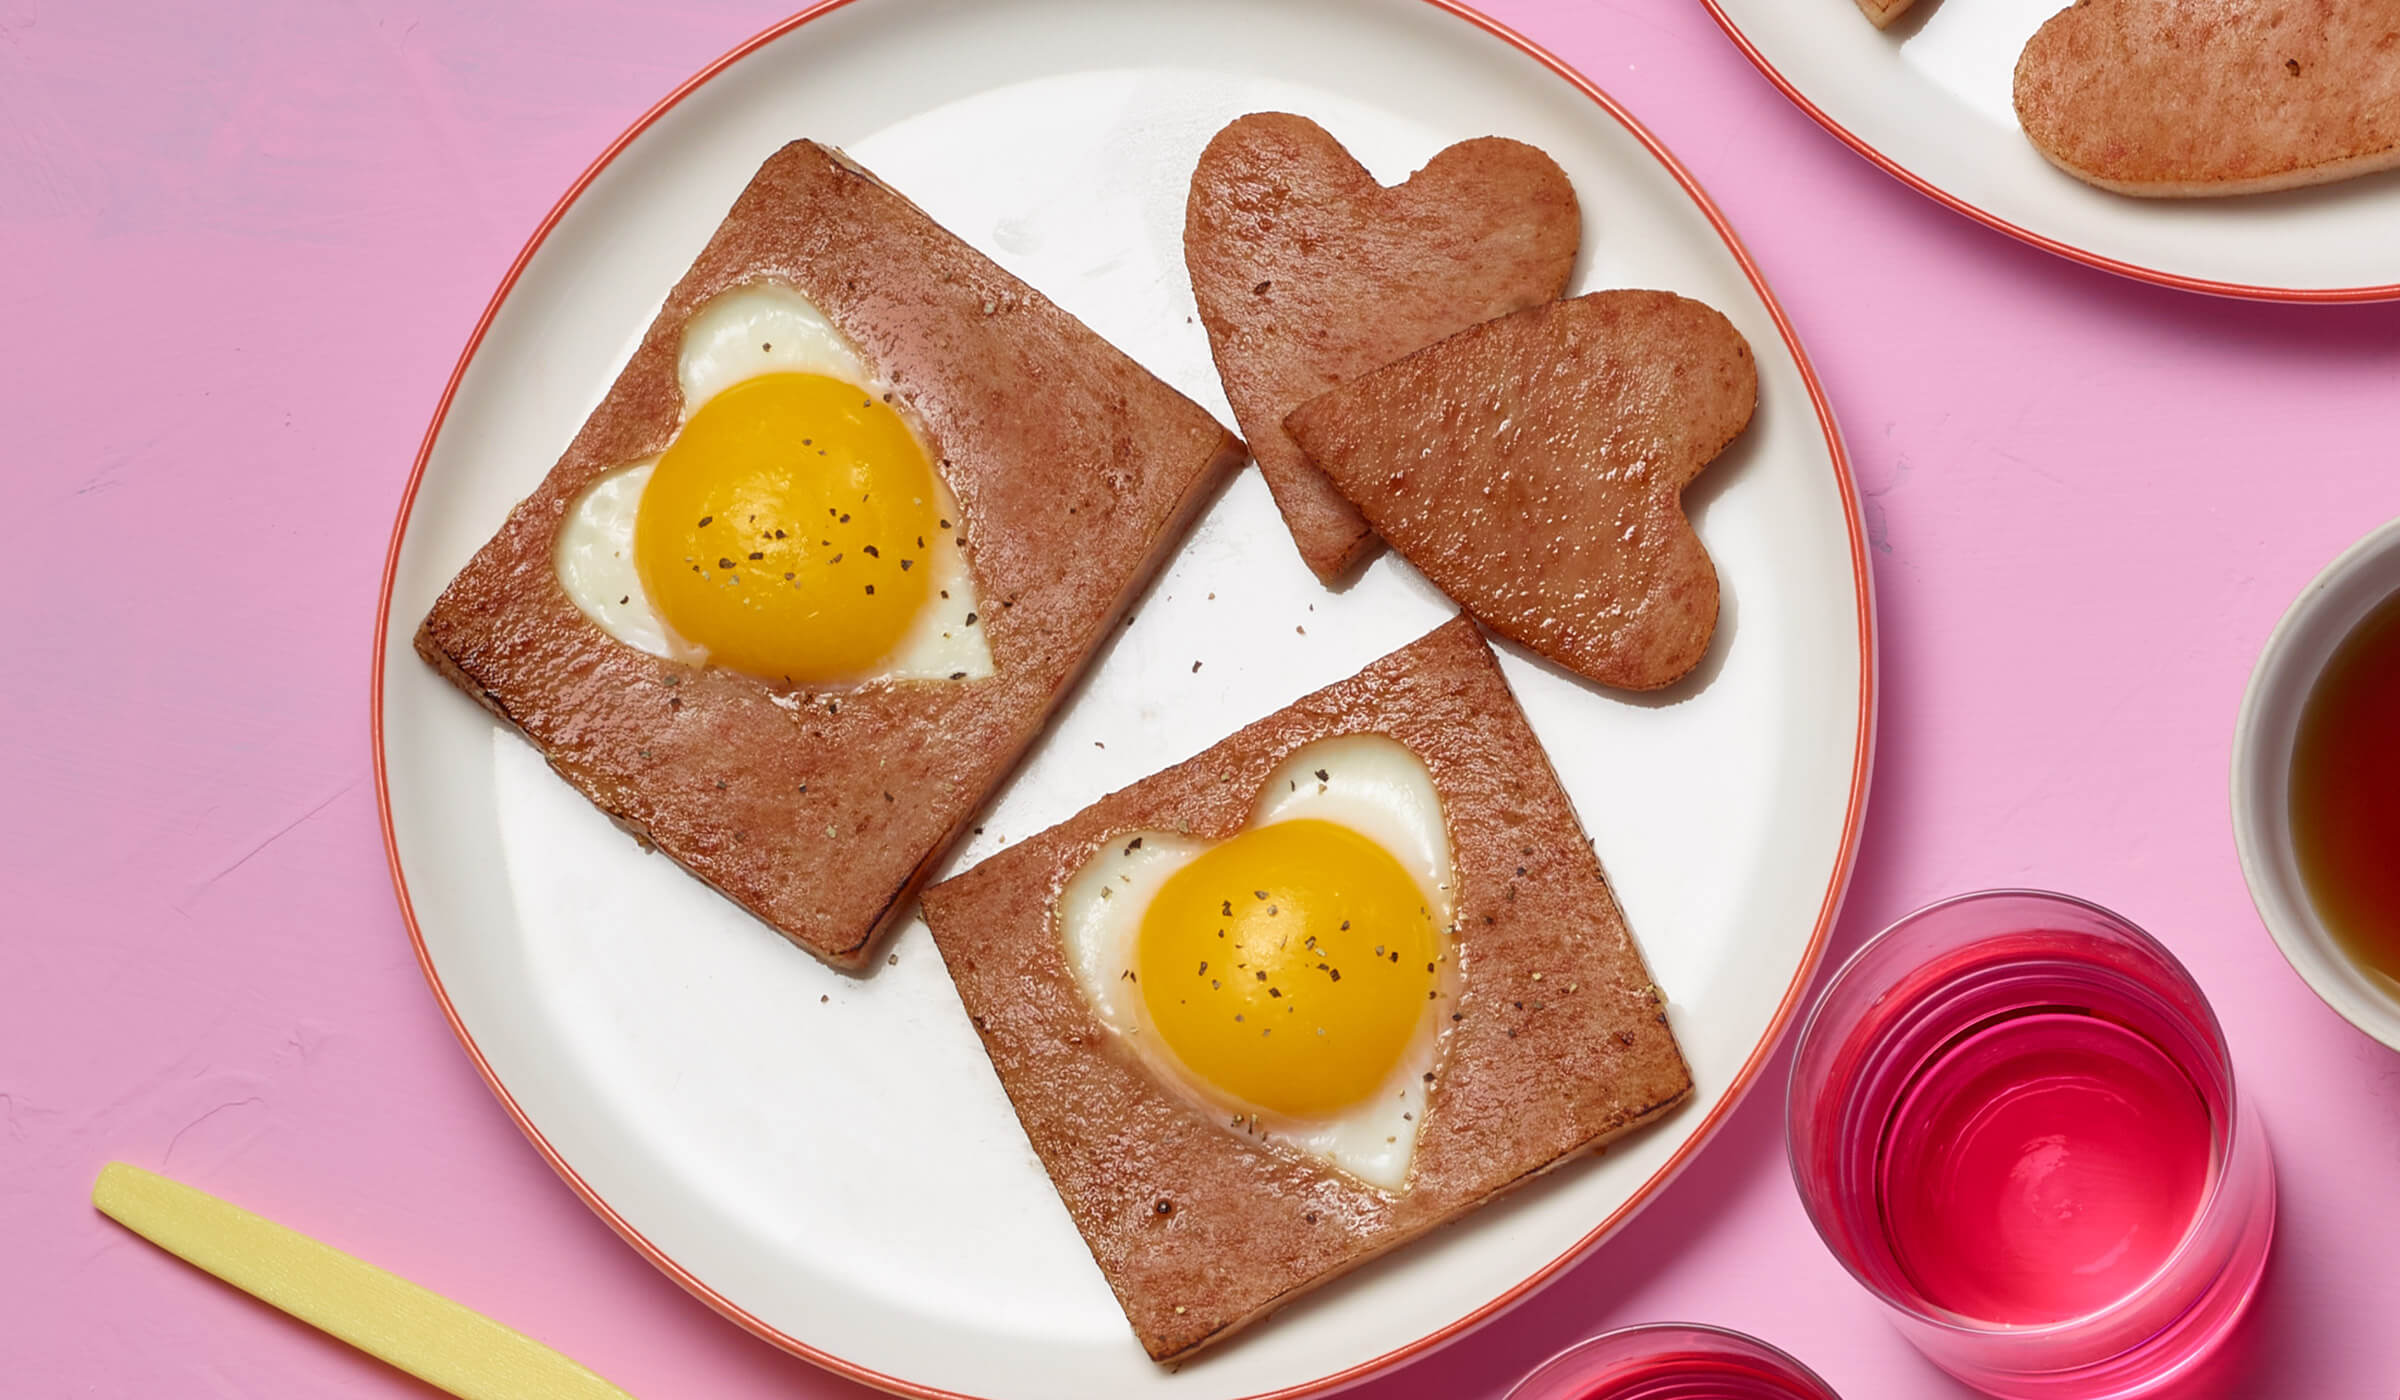 SPAM slices with eggs in the shape of hearts